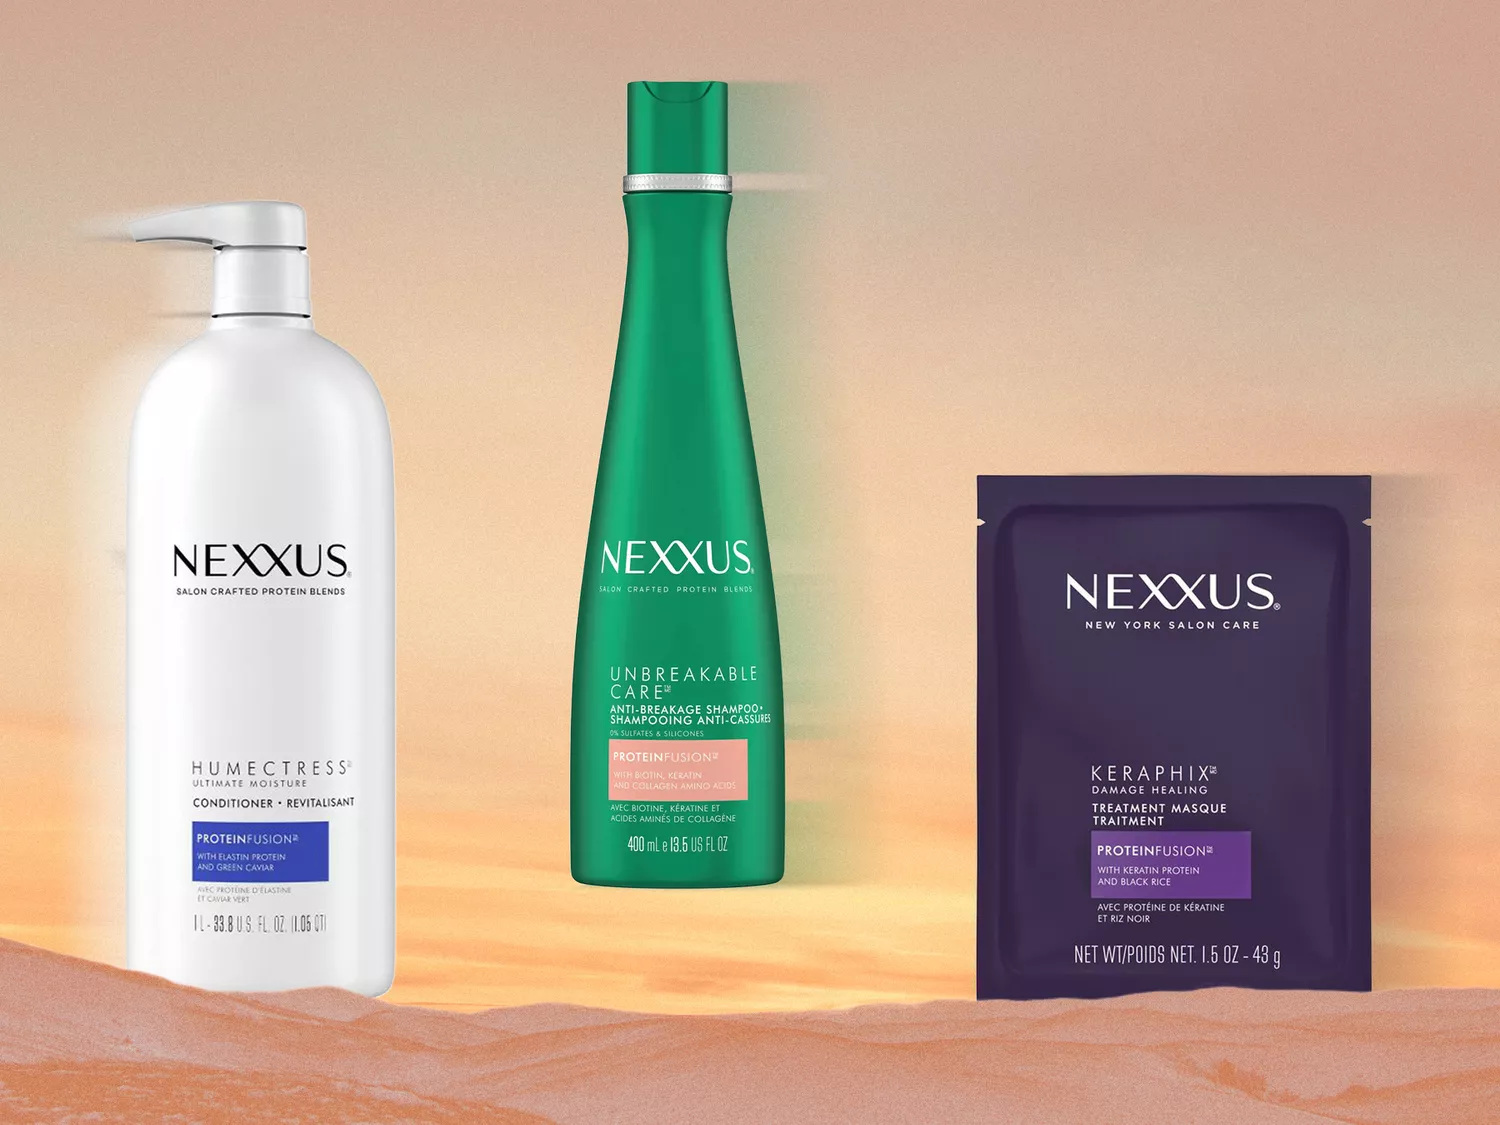 Three Nexxus haircare products on a warm-toned background